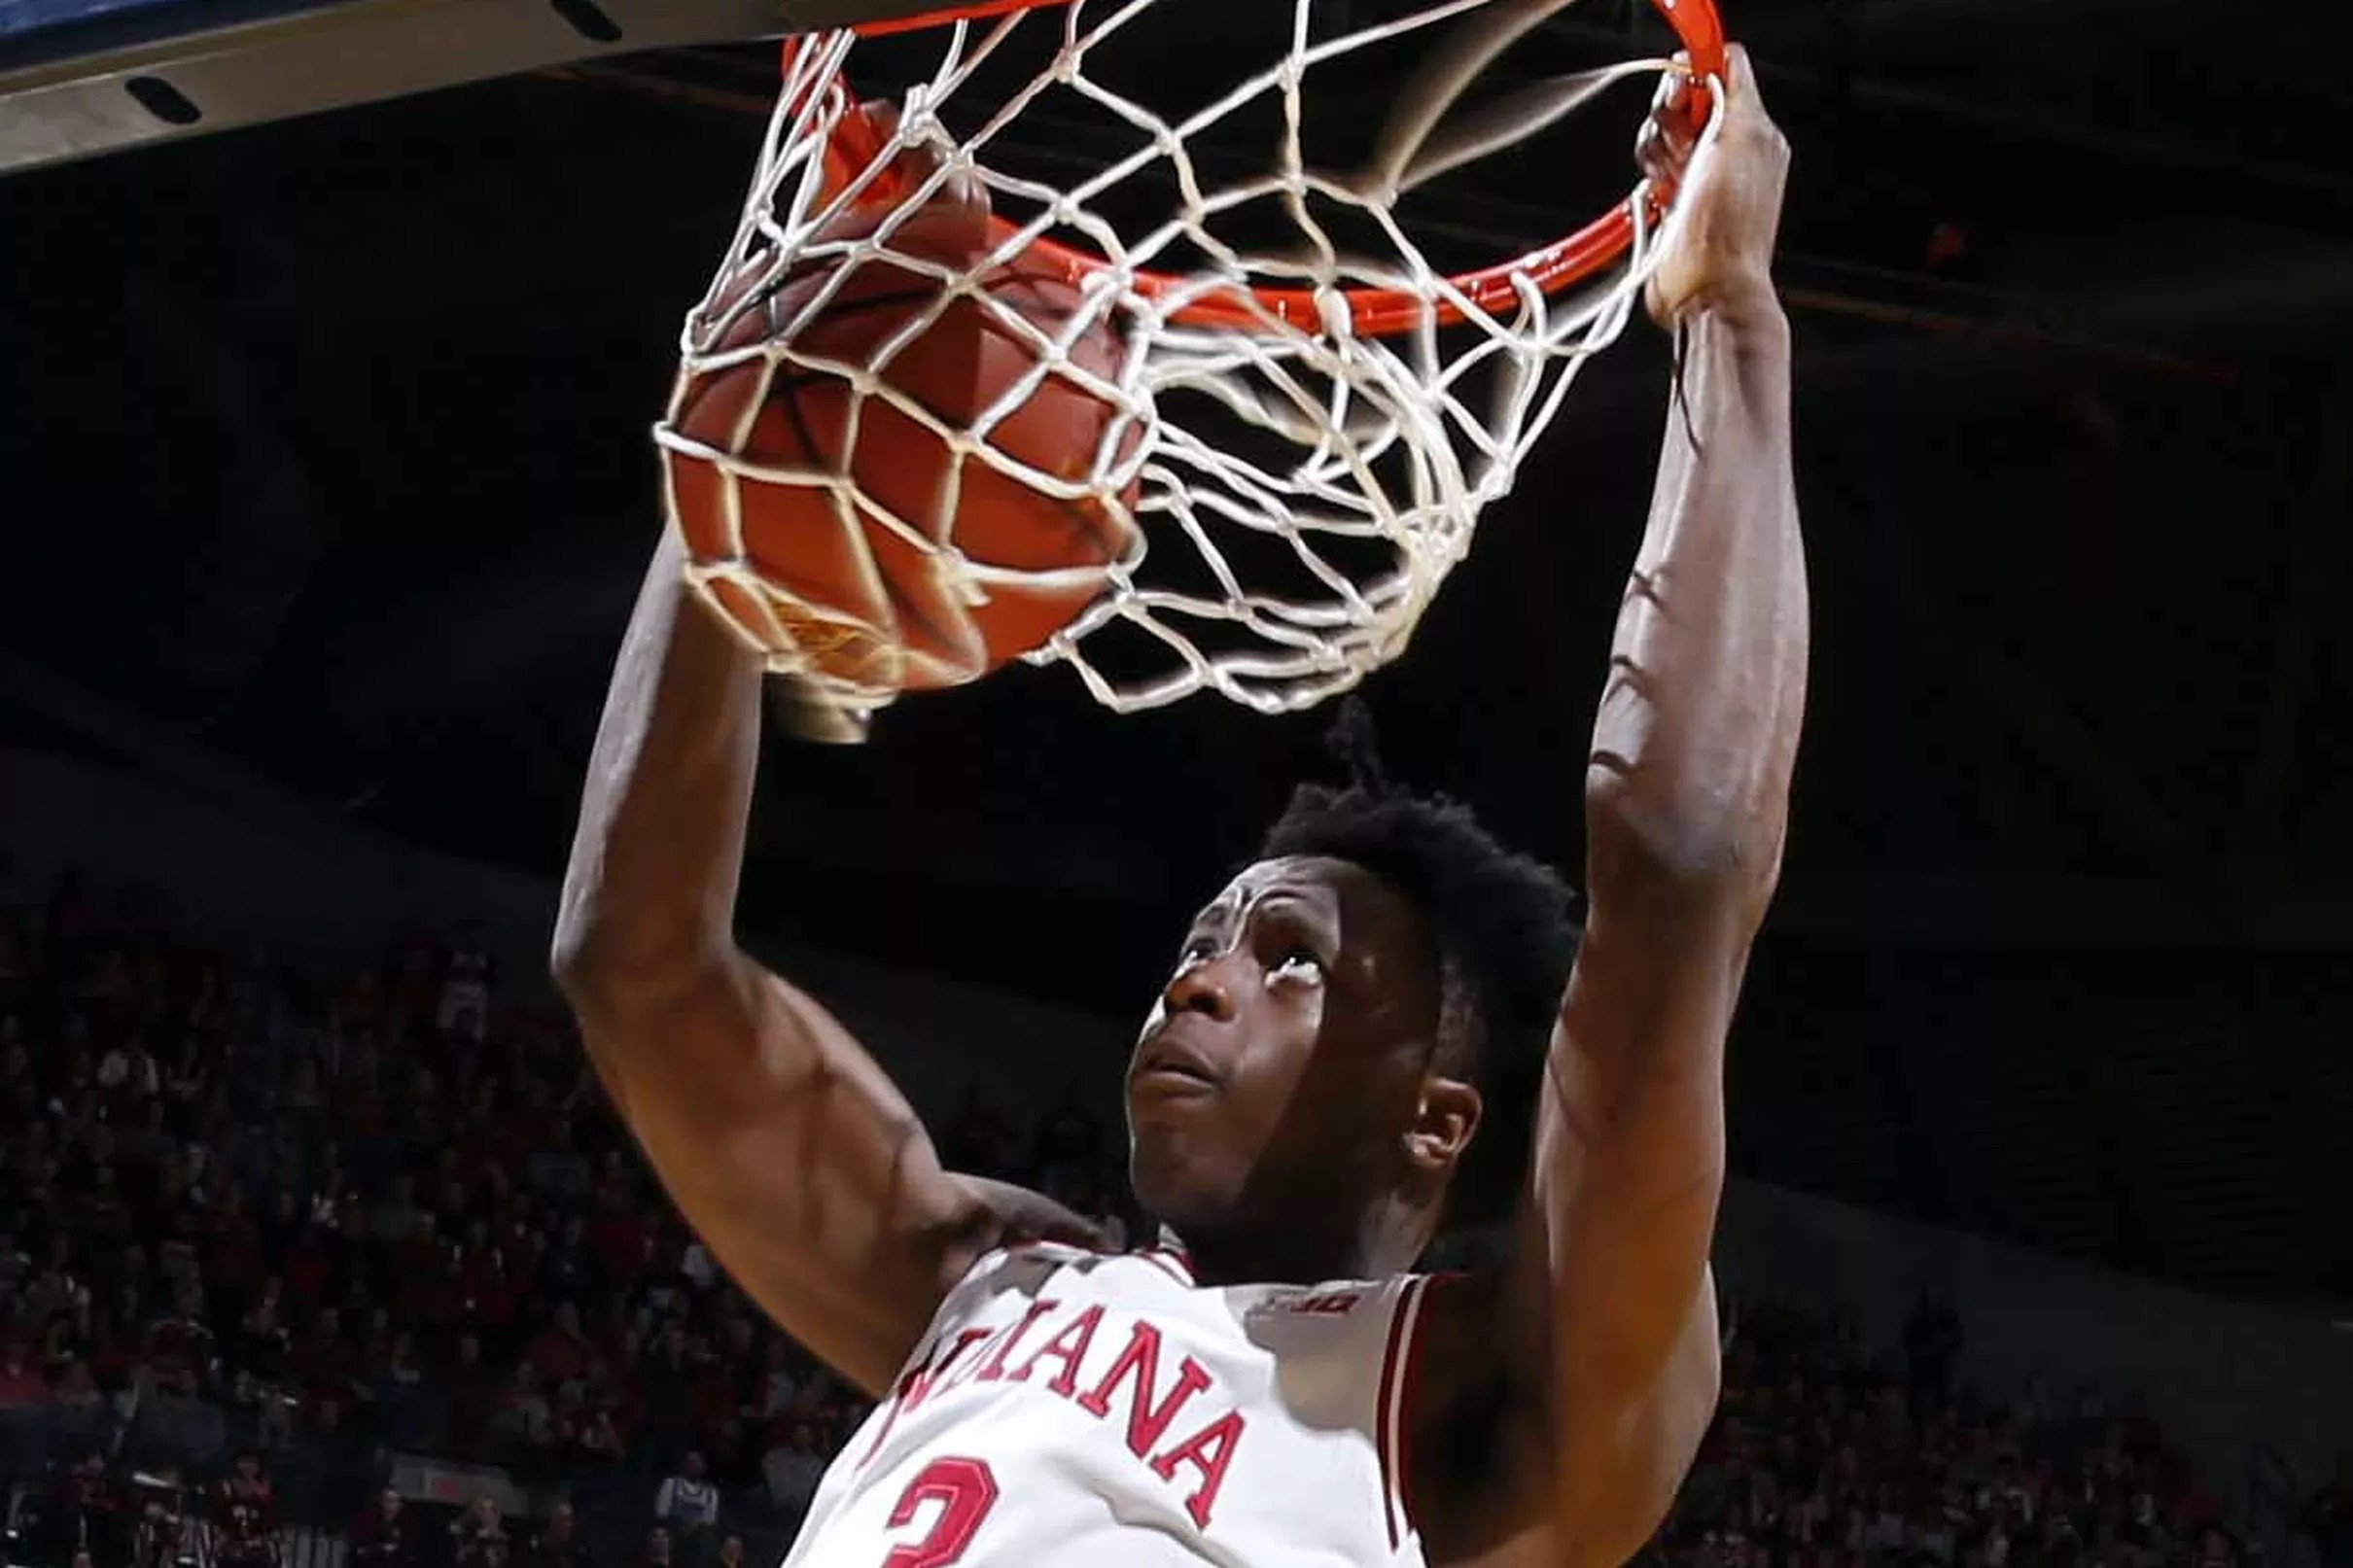 OG Anunoby could be the steal of the draft